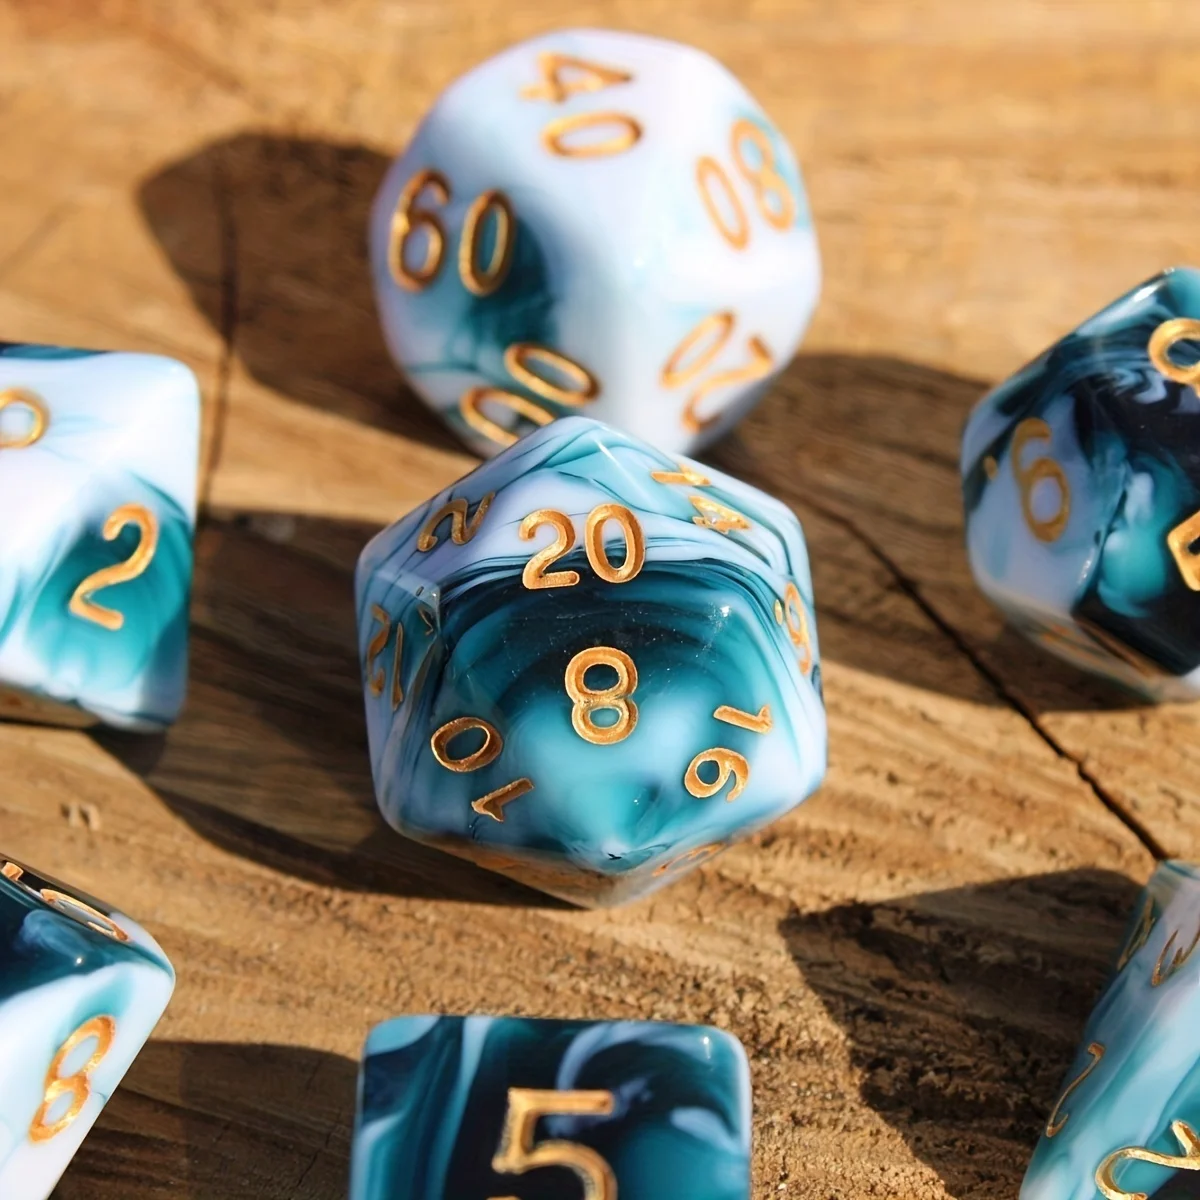 7Pcs/Set Blueberry Marble Dice for DND Dungeons and Dragons Table Games D&D RPG Tabletop Roleplaying dungeons 3 clash of gods pc